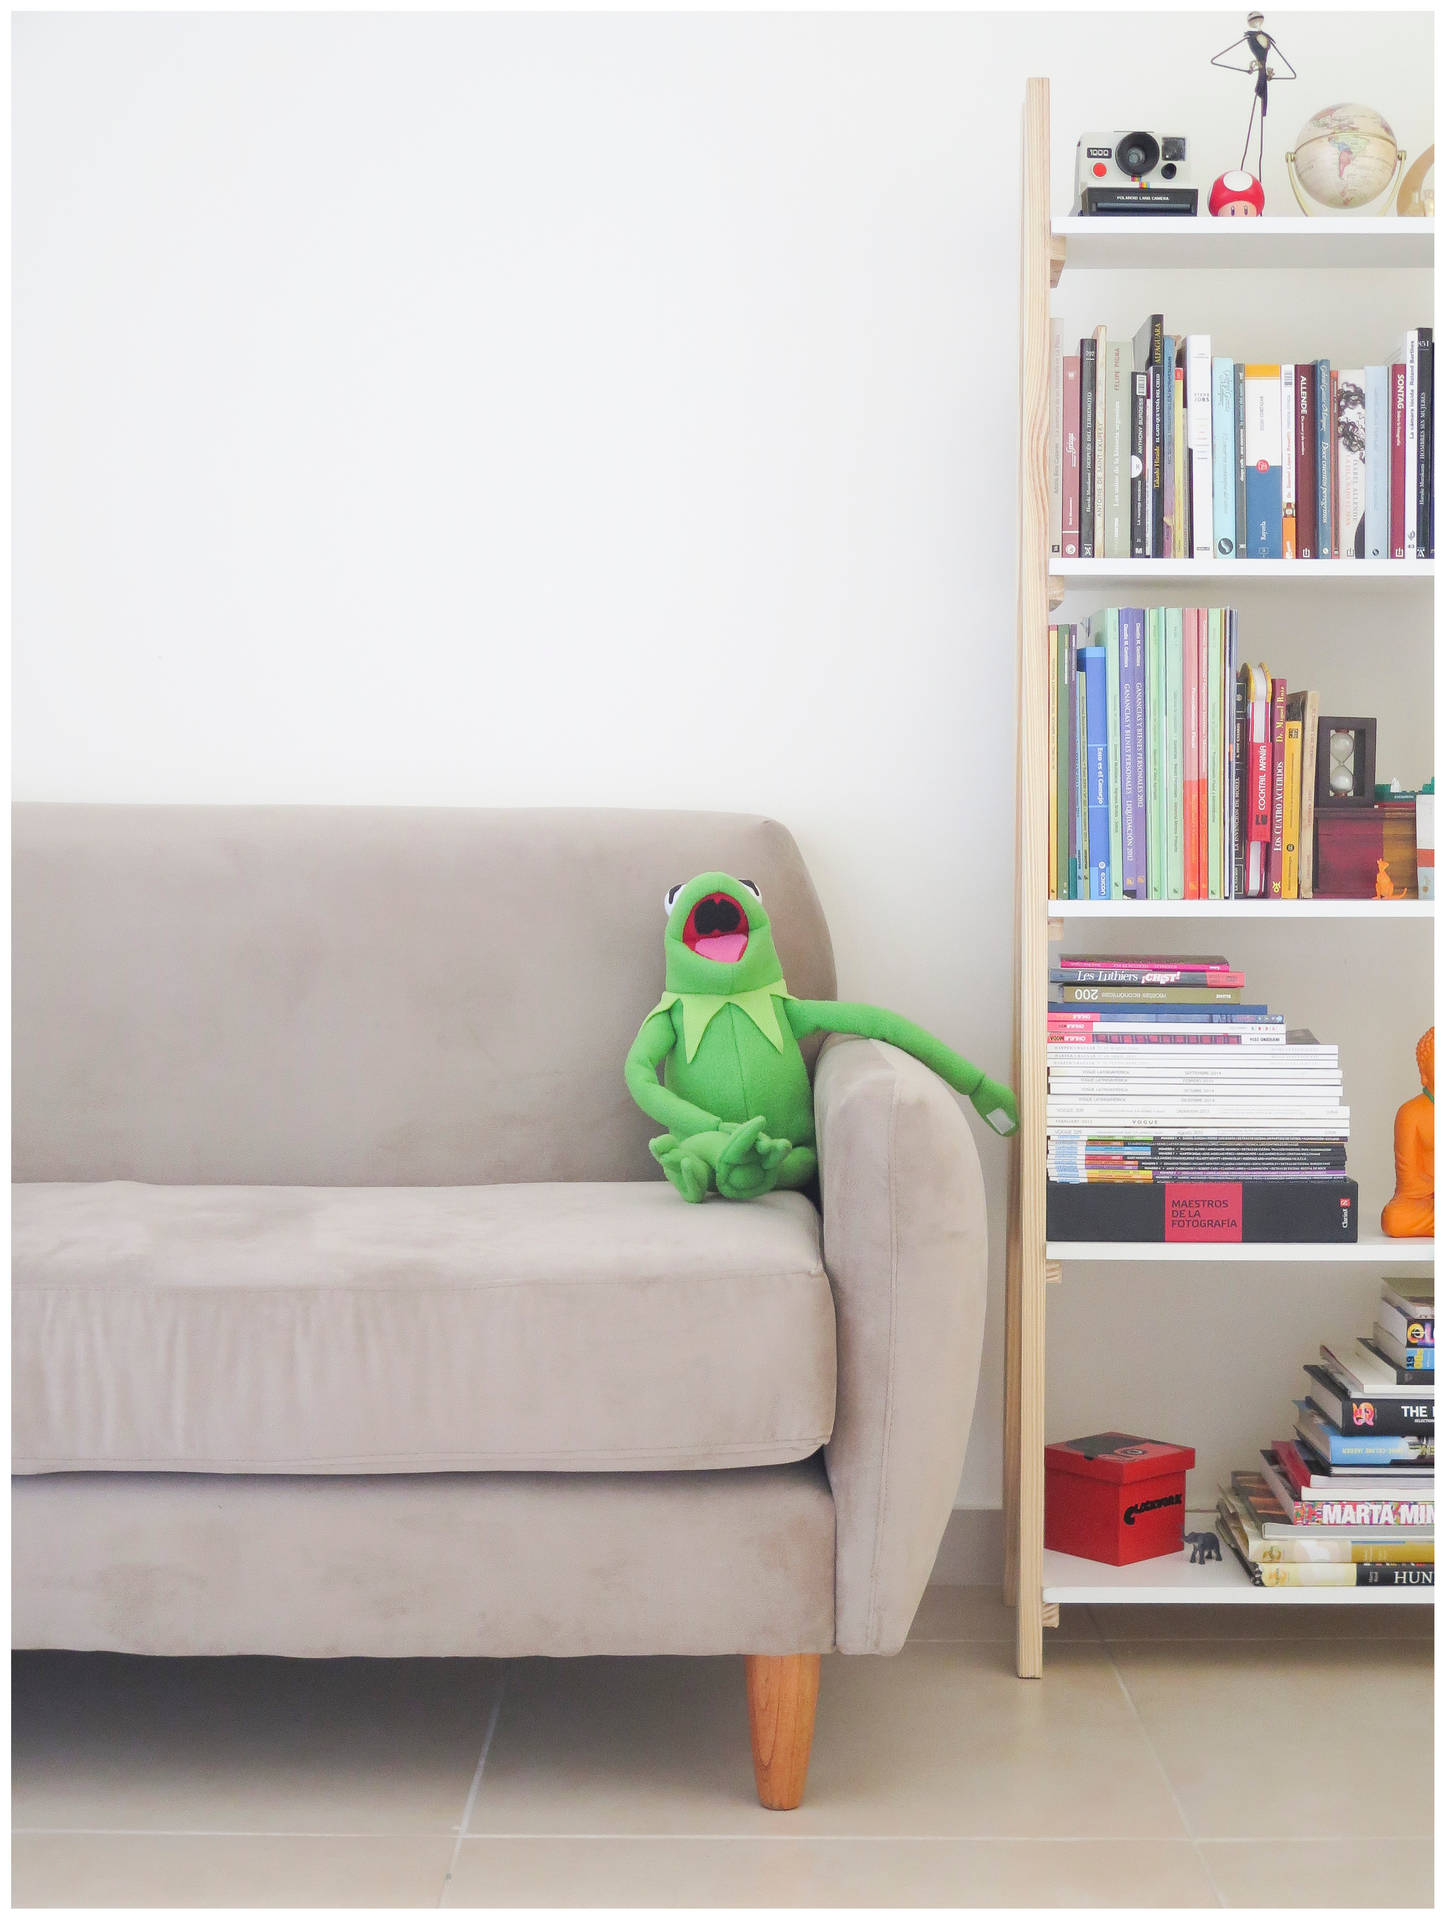 Kermit The Frog On Couch Background